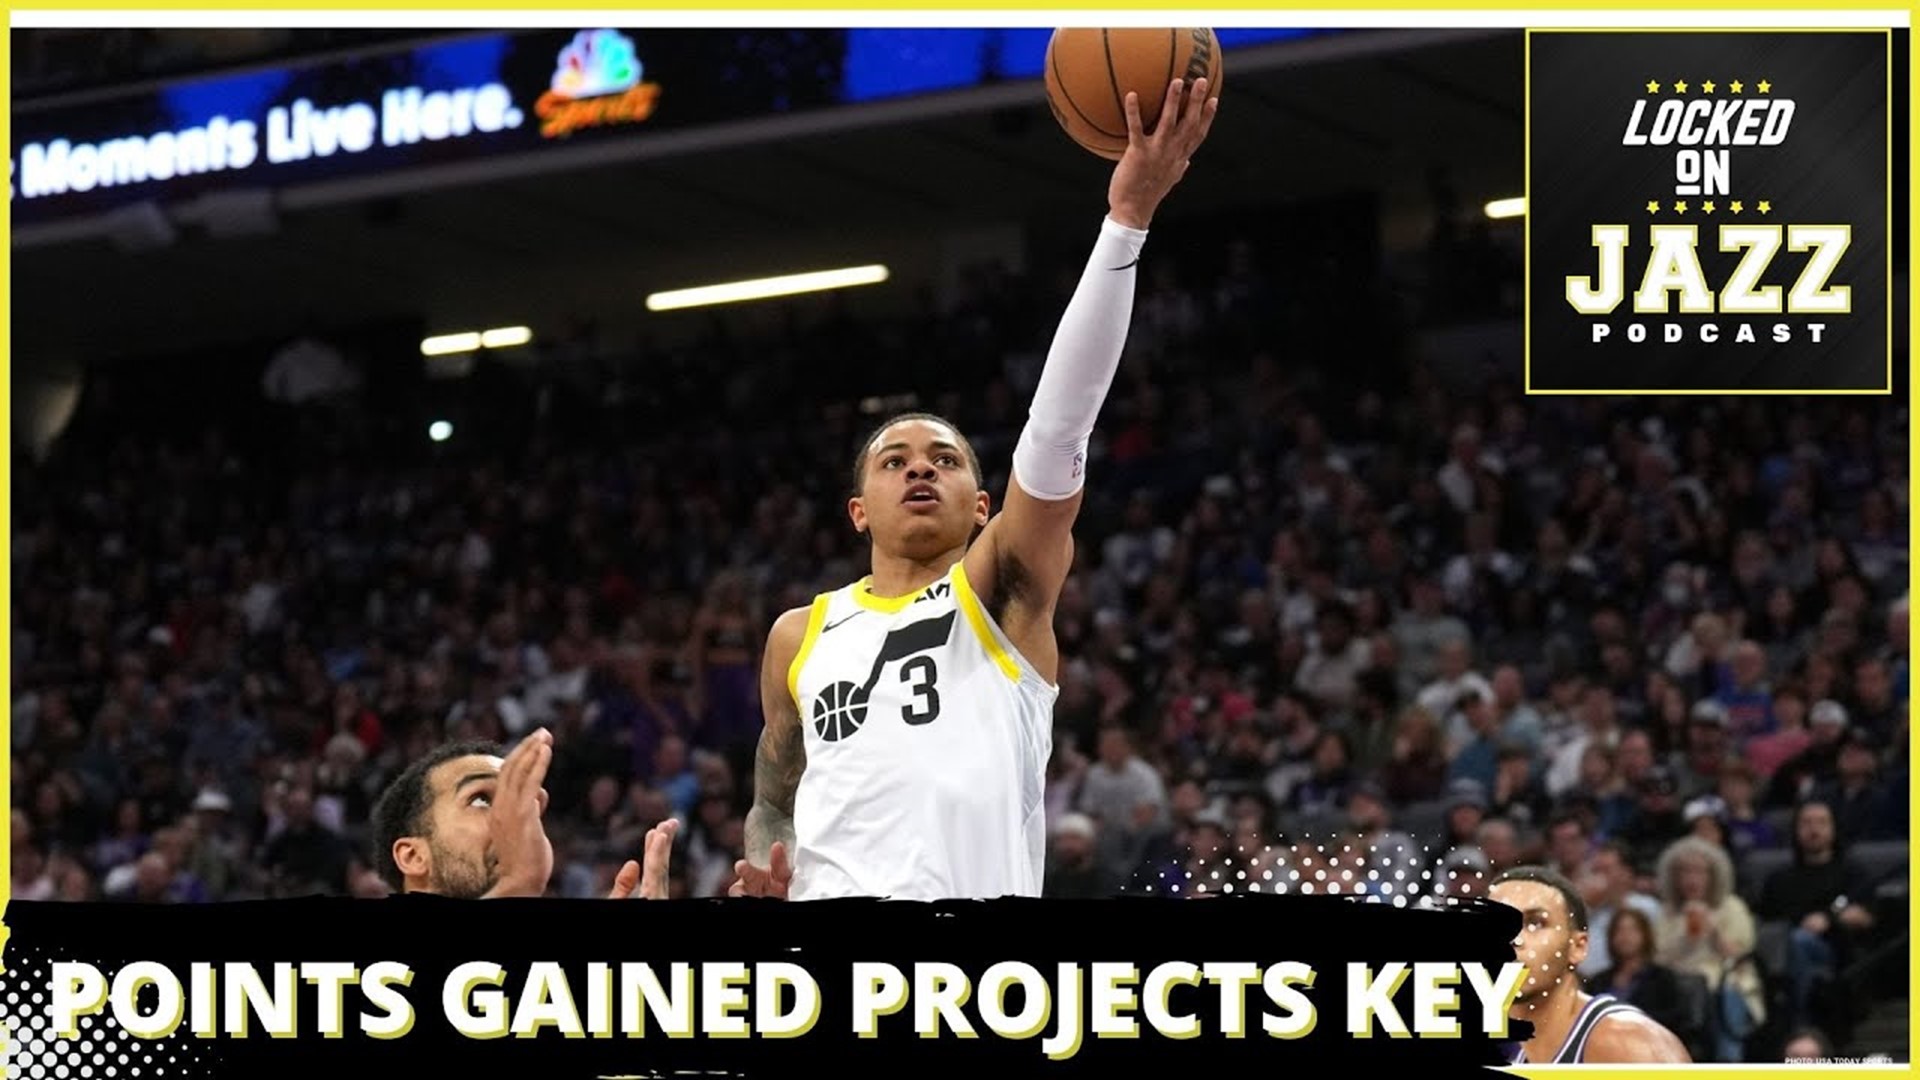 Points Gained edition of Locked On Jazz looking at Jazz and the rest of the NBA.